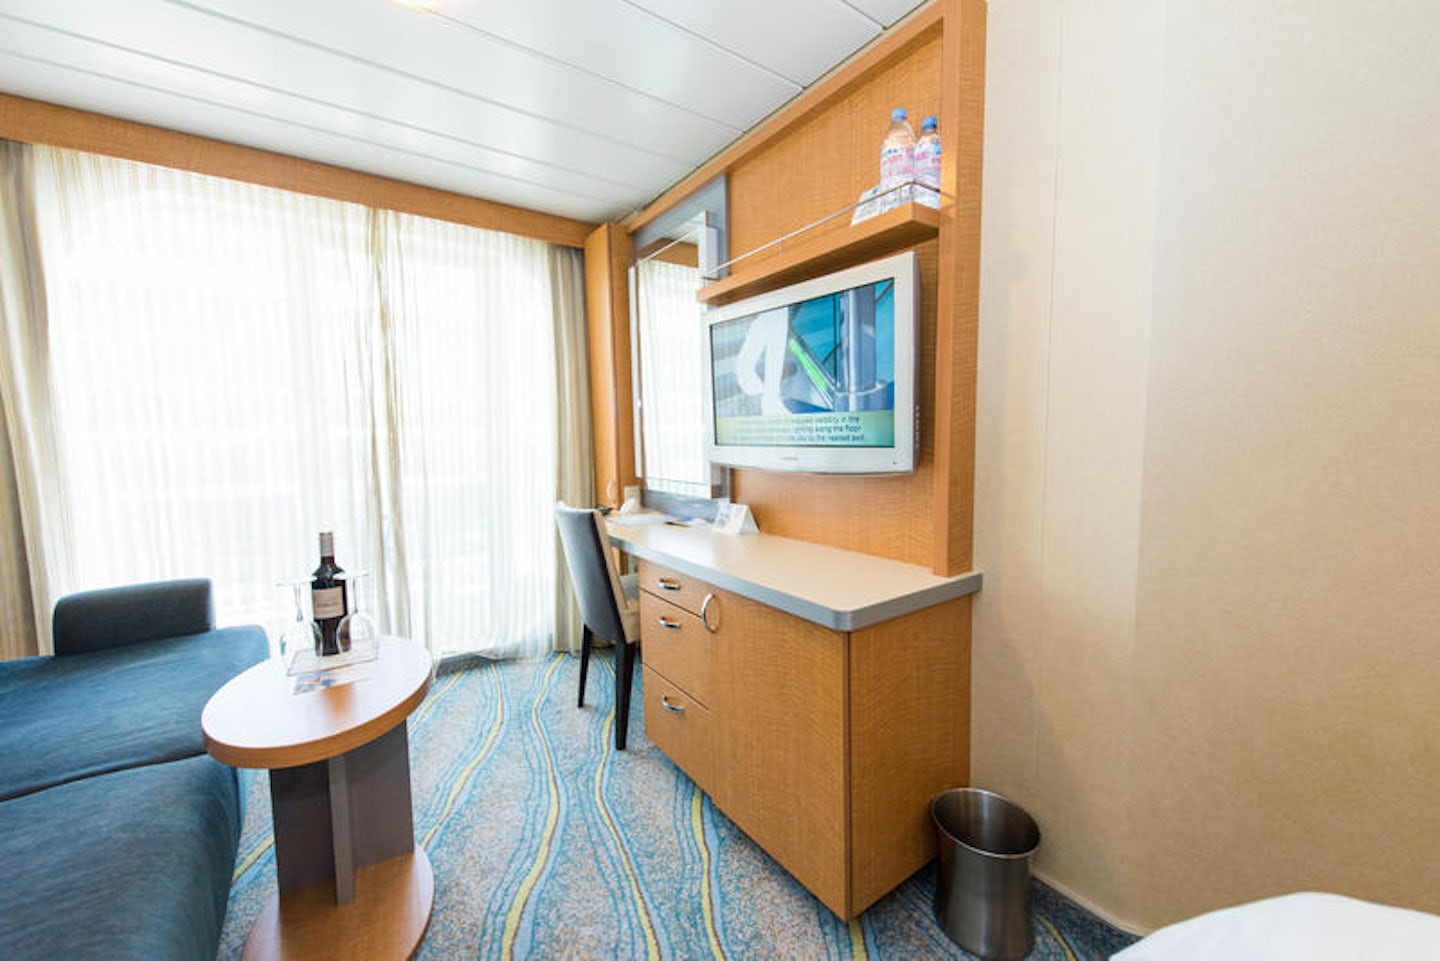 The Central Park View Cabin with Balcony on Oasis of the Seas